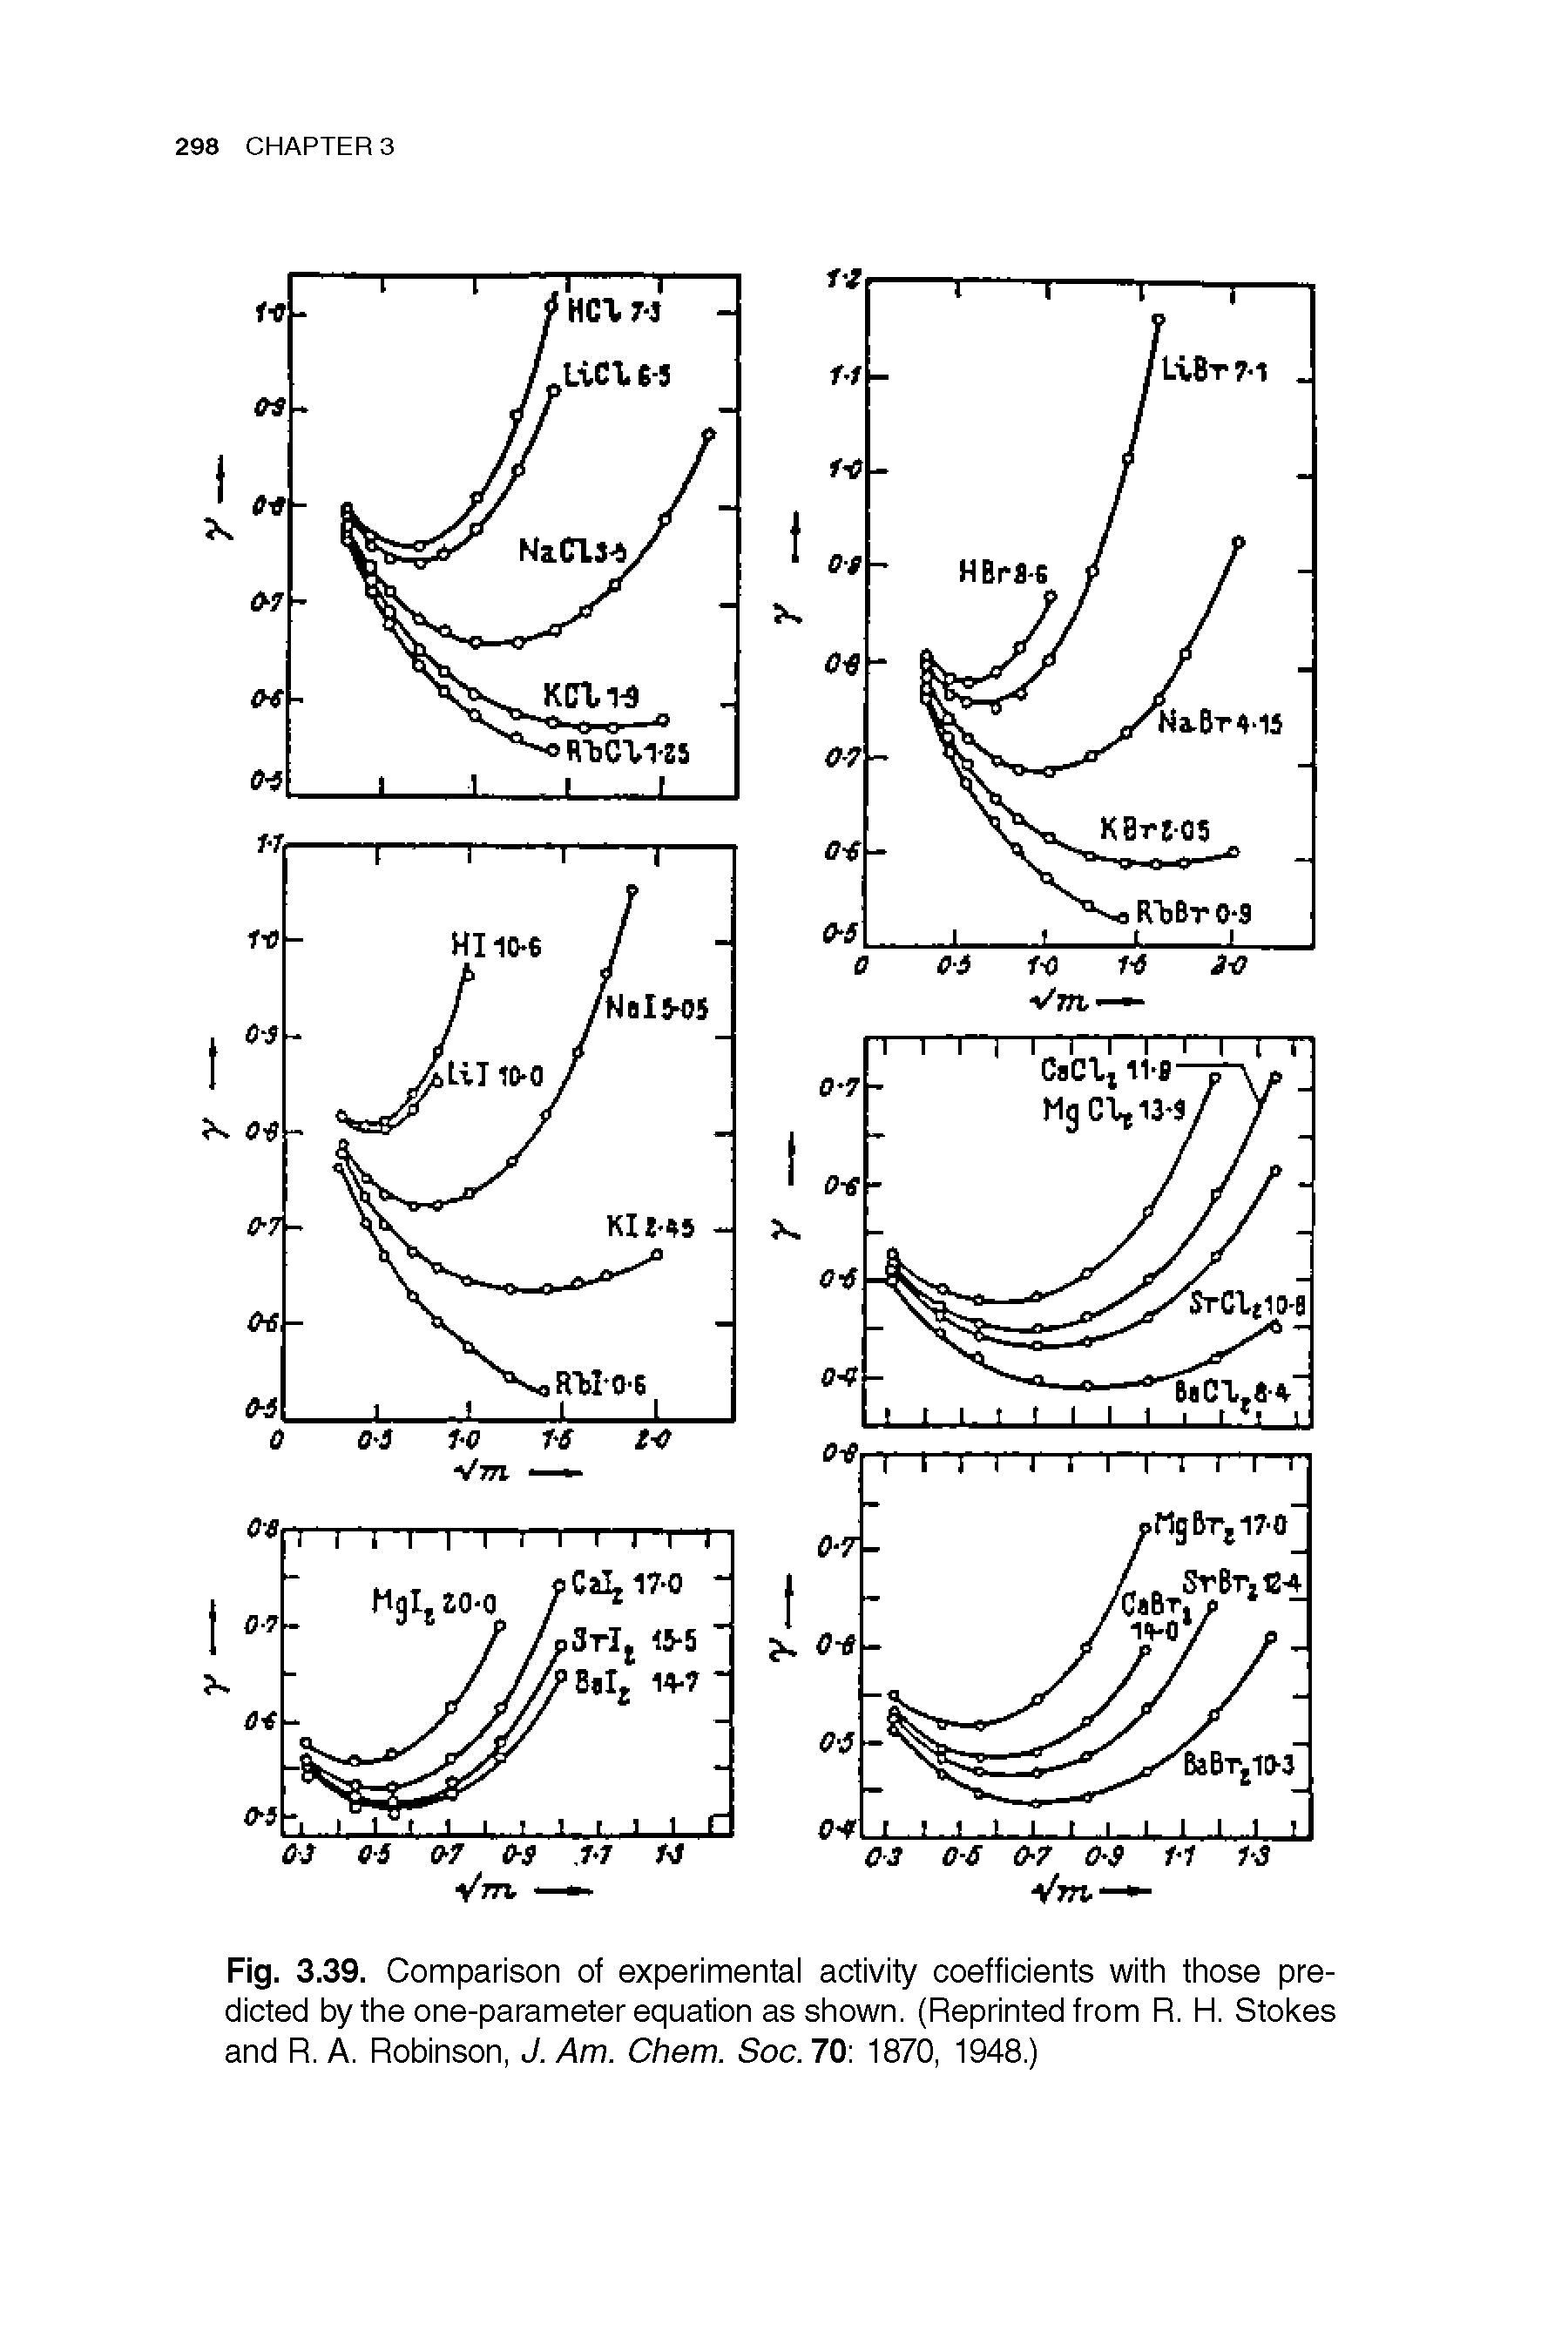 Fig. 3.39. Comparison of experimental activity coefficients with those predicted by the one-parameter equation as shown. (Reprinted from R. H. Stokes and R. A. Robinson, J. Am. Chem. Soc. 70 1870, 1948.)...